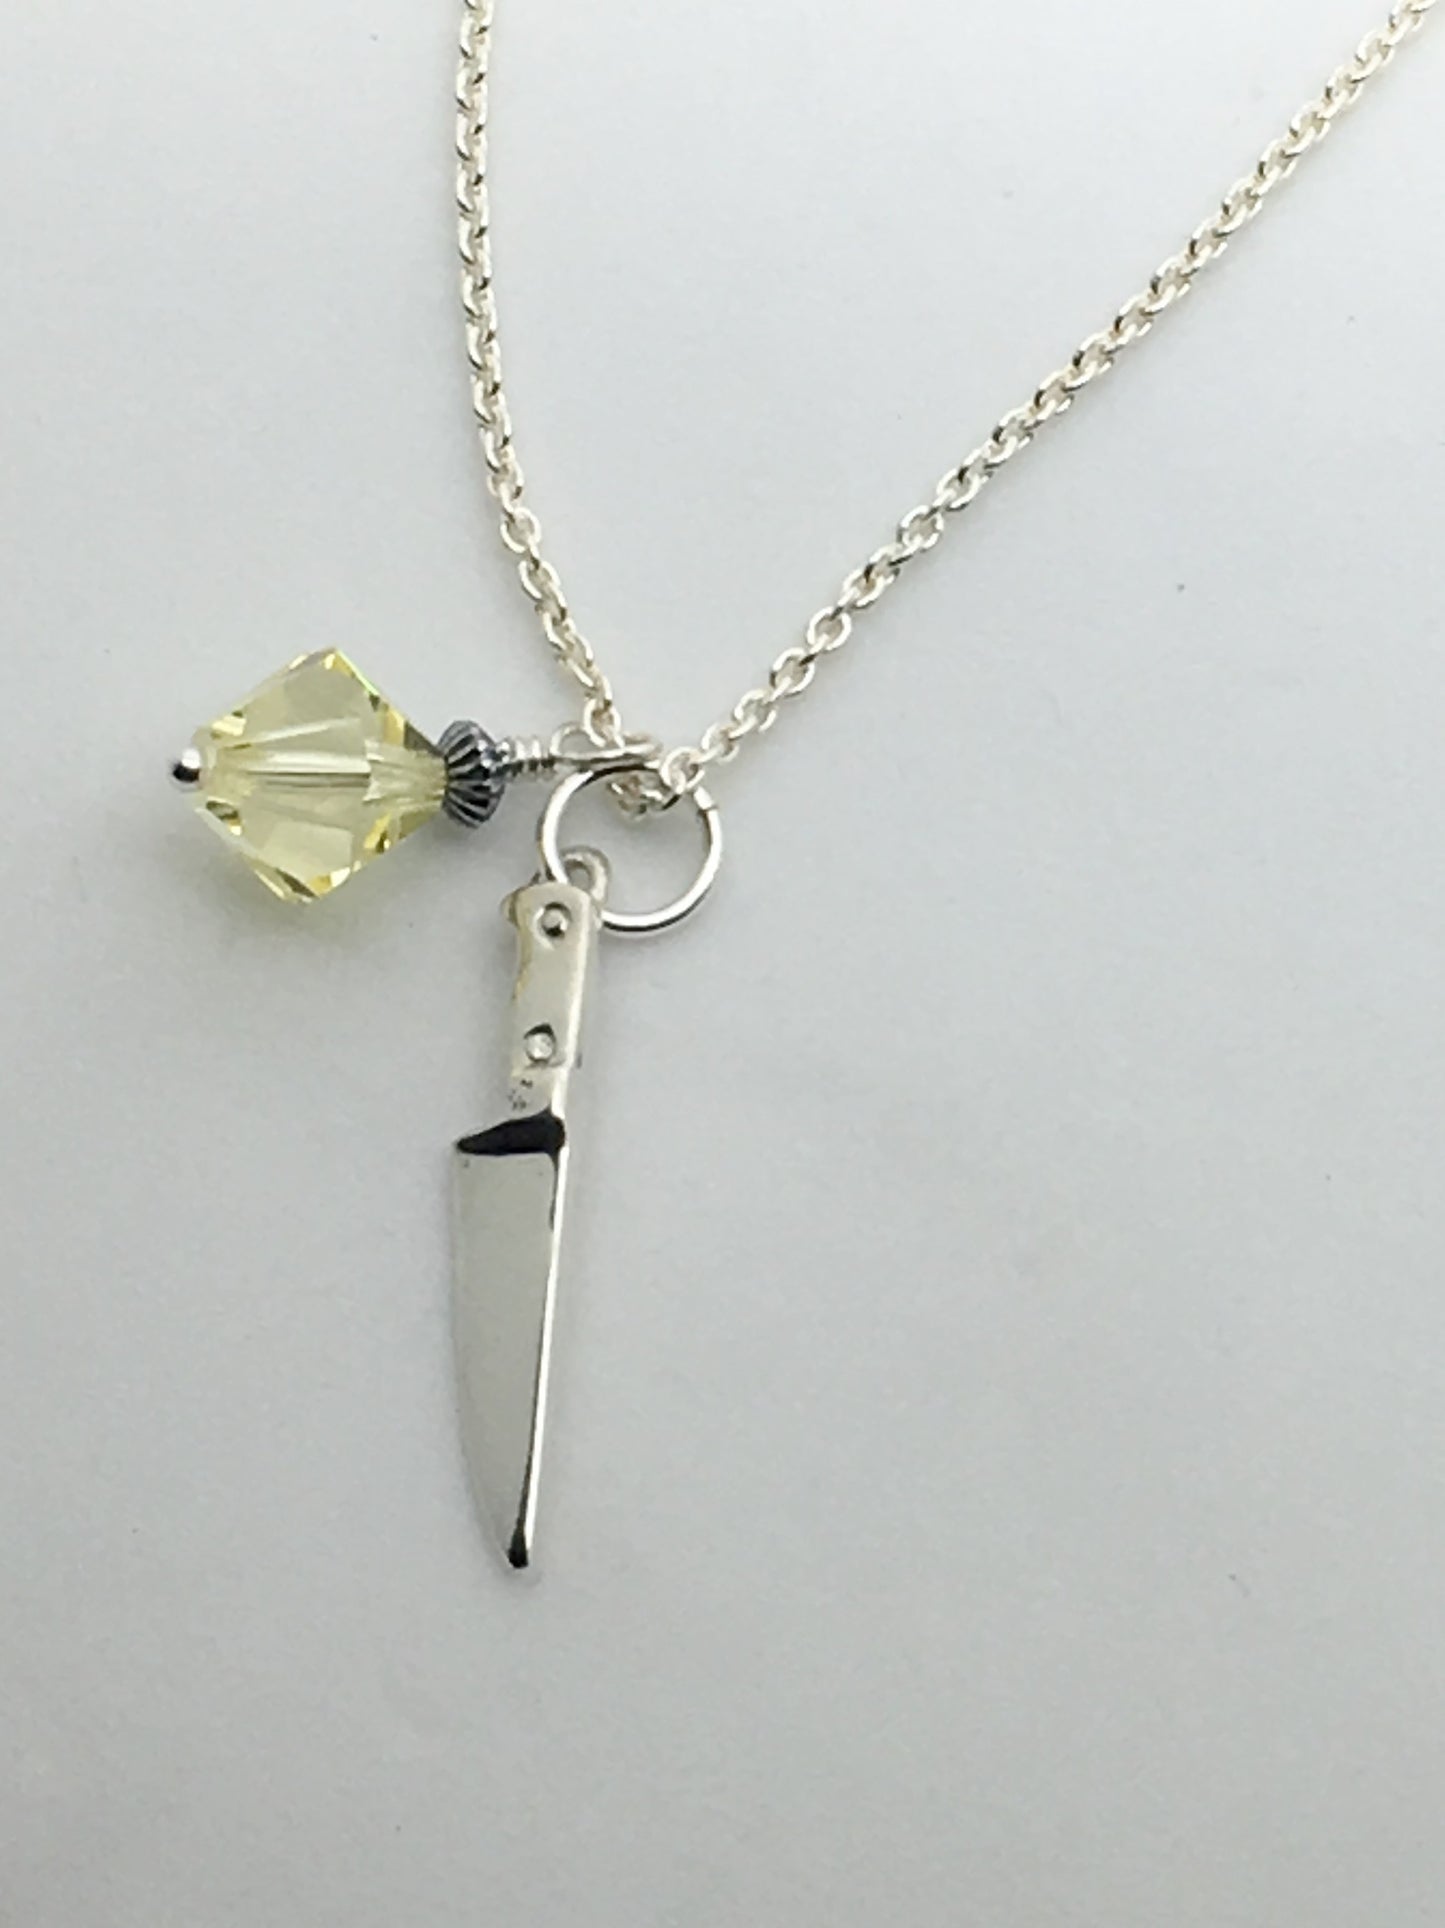 Chef's Knife Pendant Necklace with Yellow Swarovski Crystal Charm